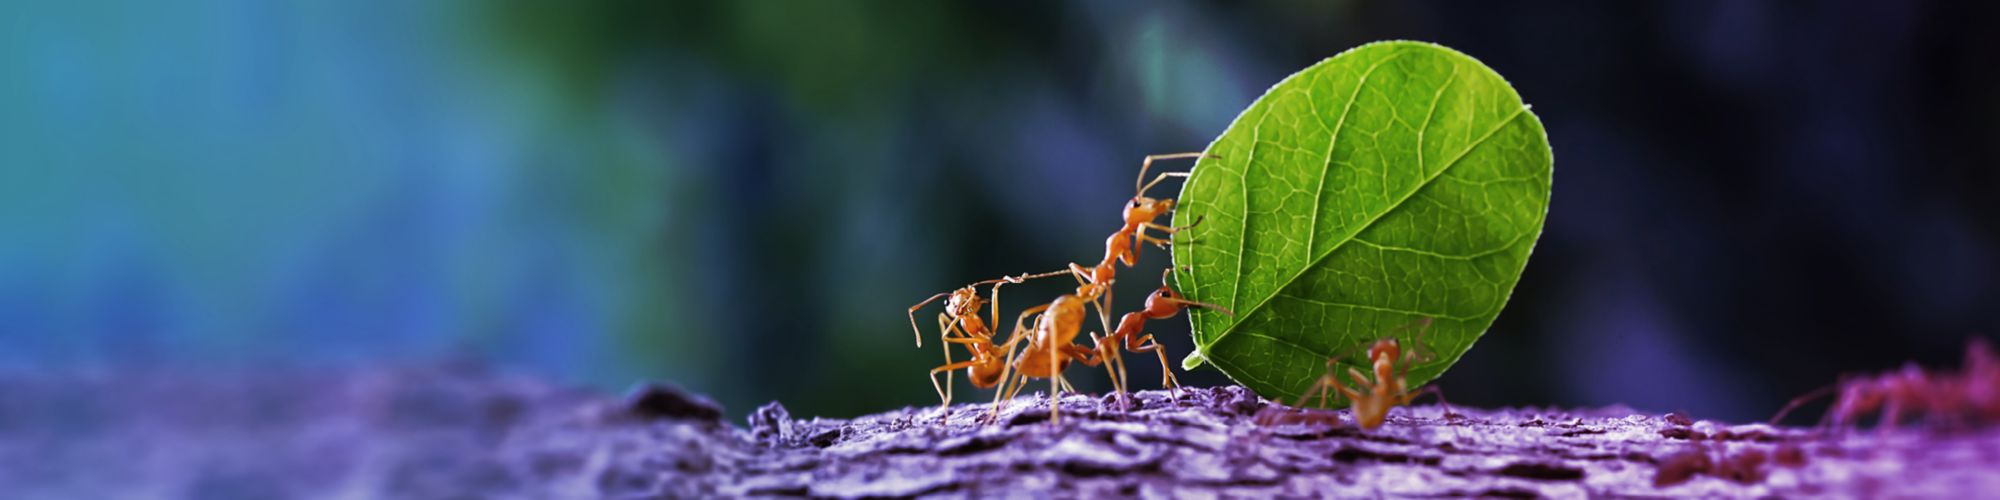 ants working together